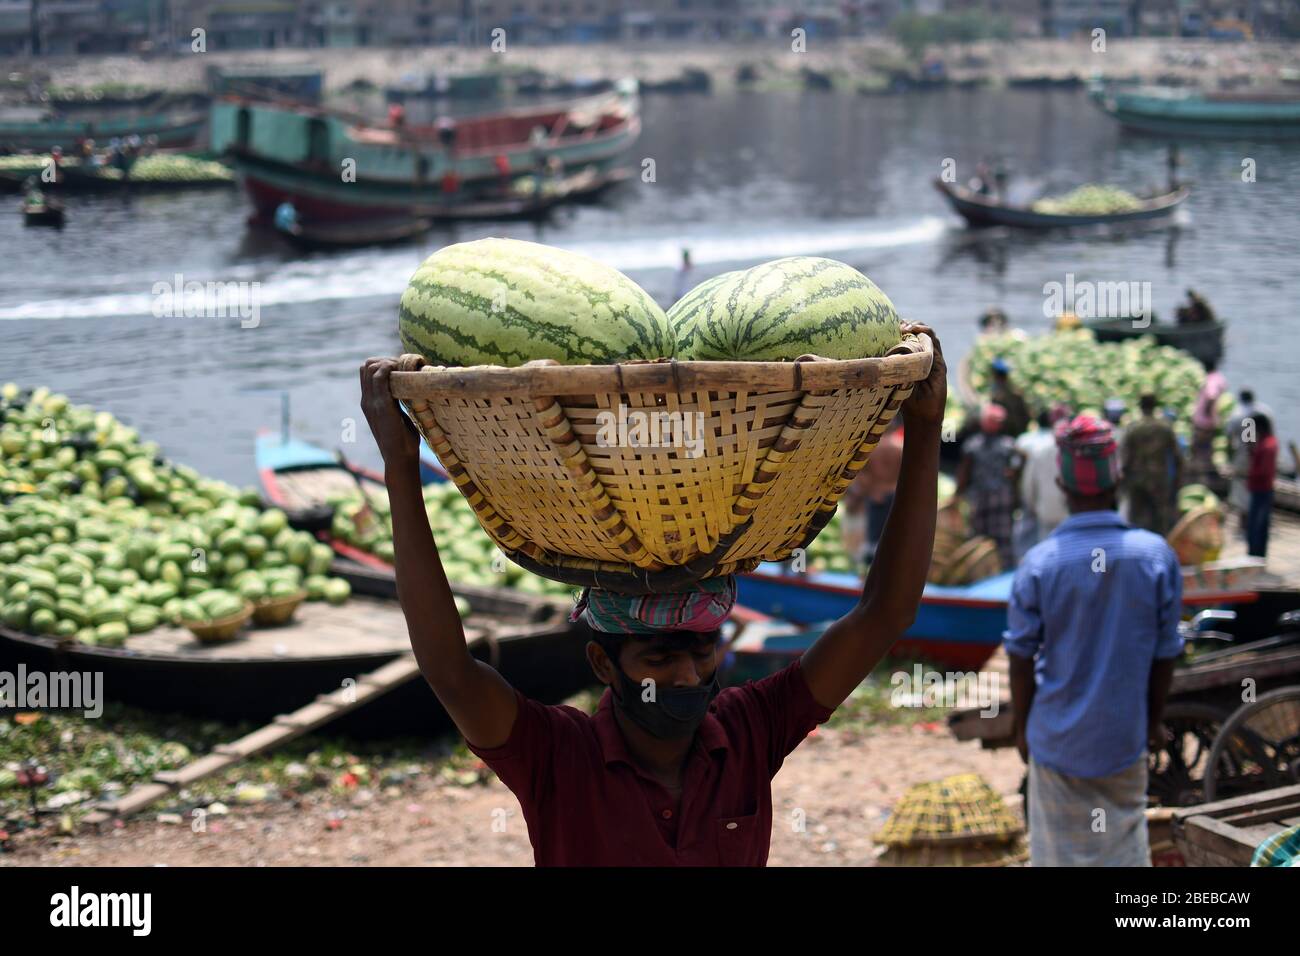 Bangladeshi labourers unload watermelons at a dock during a government-imposed lockdown as a preventive measure against the COVID-19 coronavirus in Dh Stock Photo